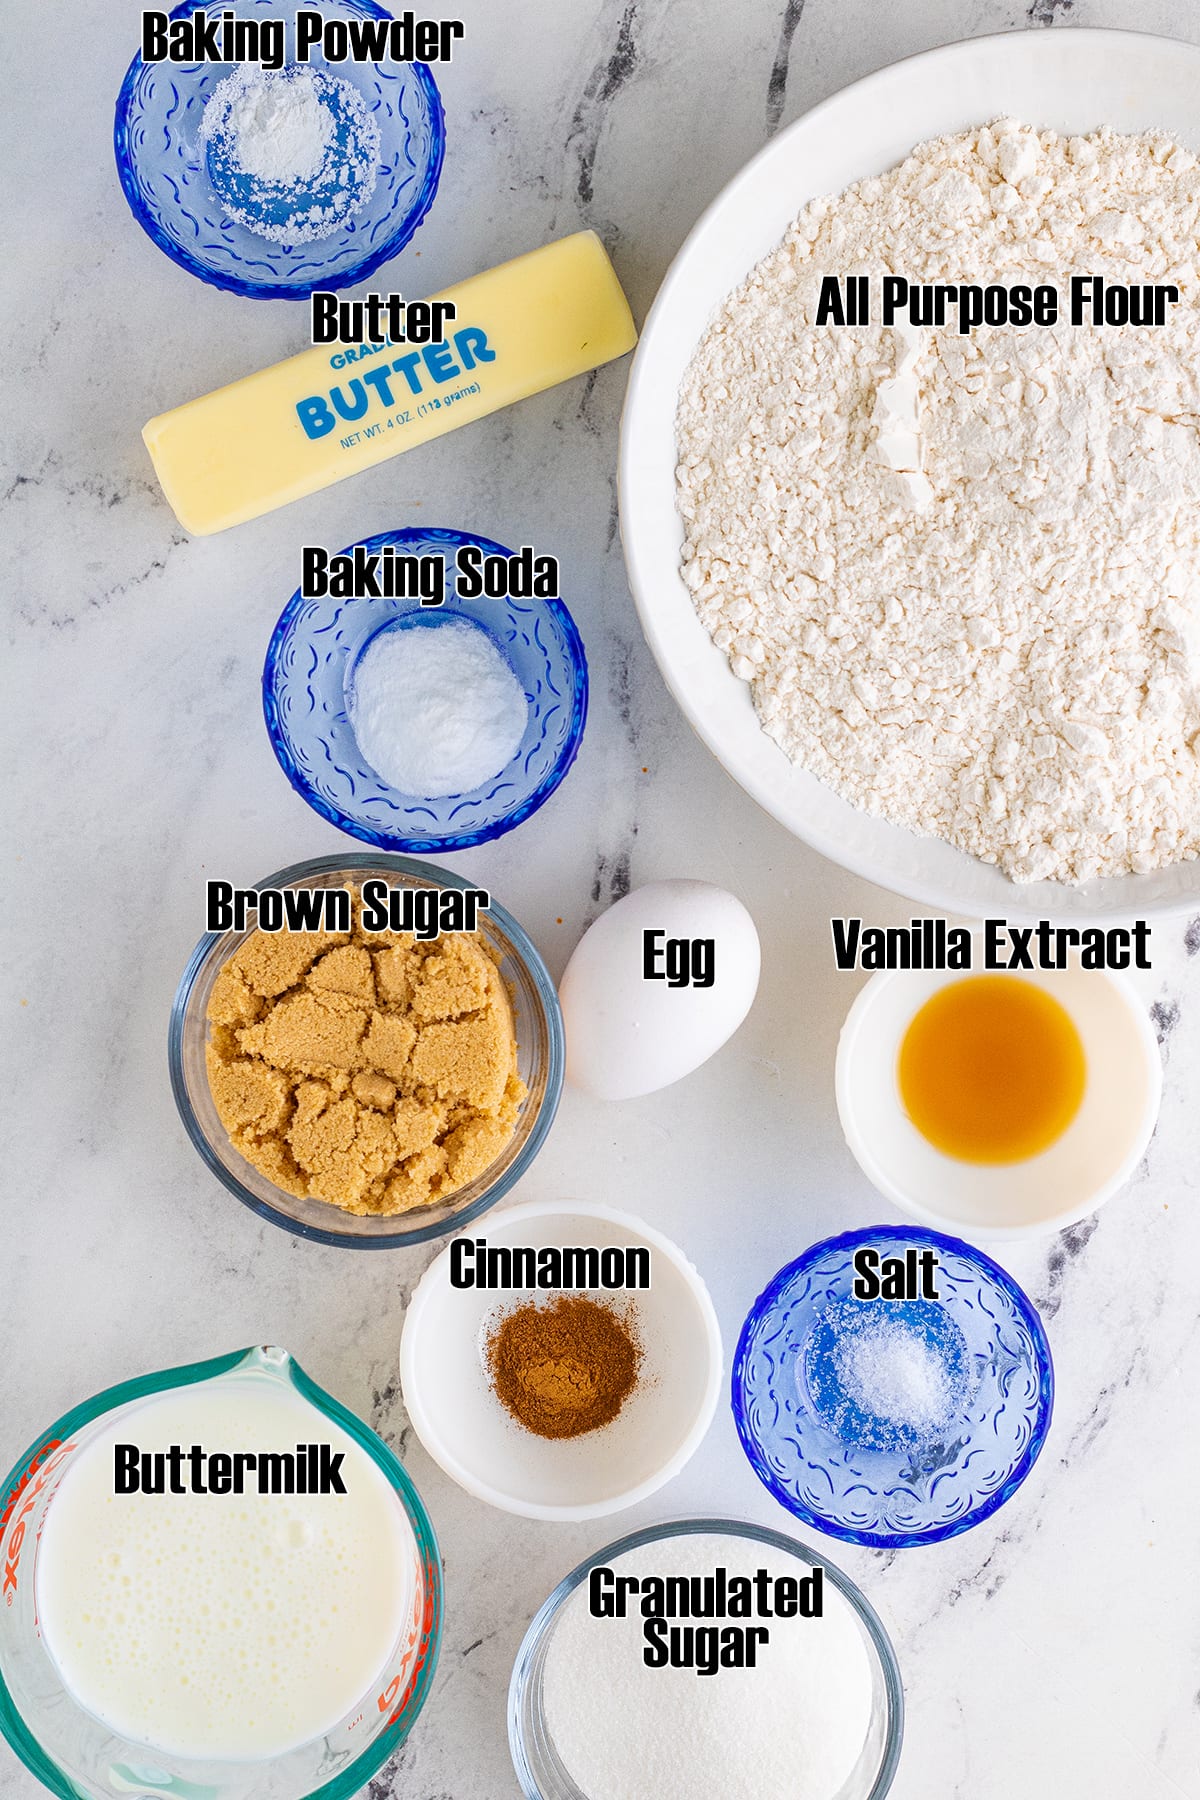 The ingredients needed to make cinnamon quick bread, with each of them labeled.